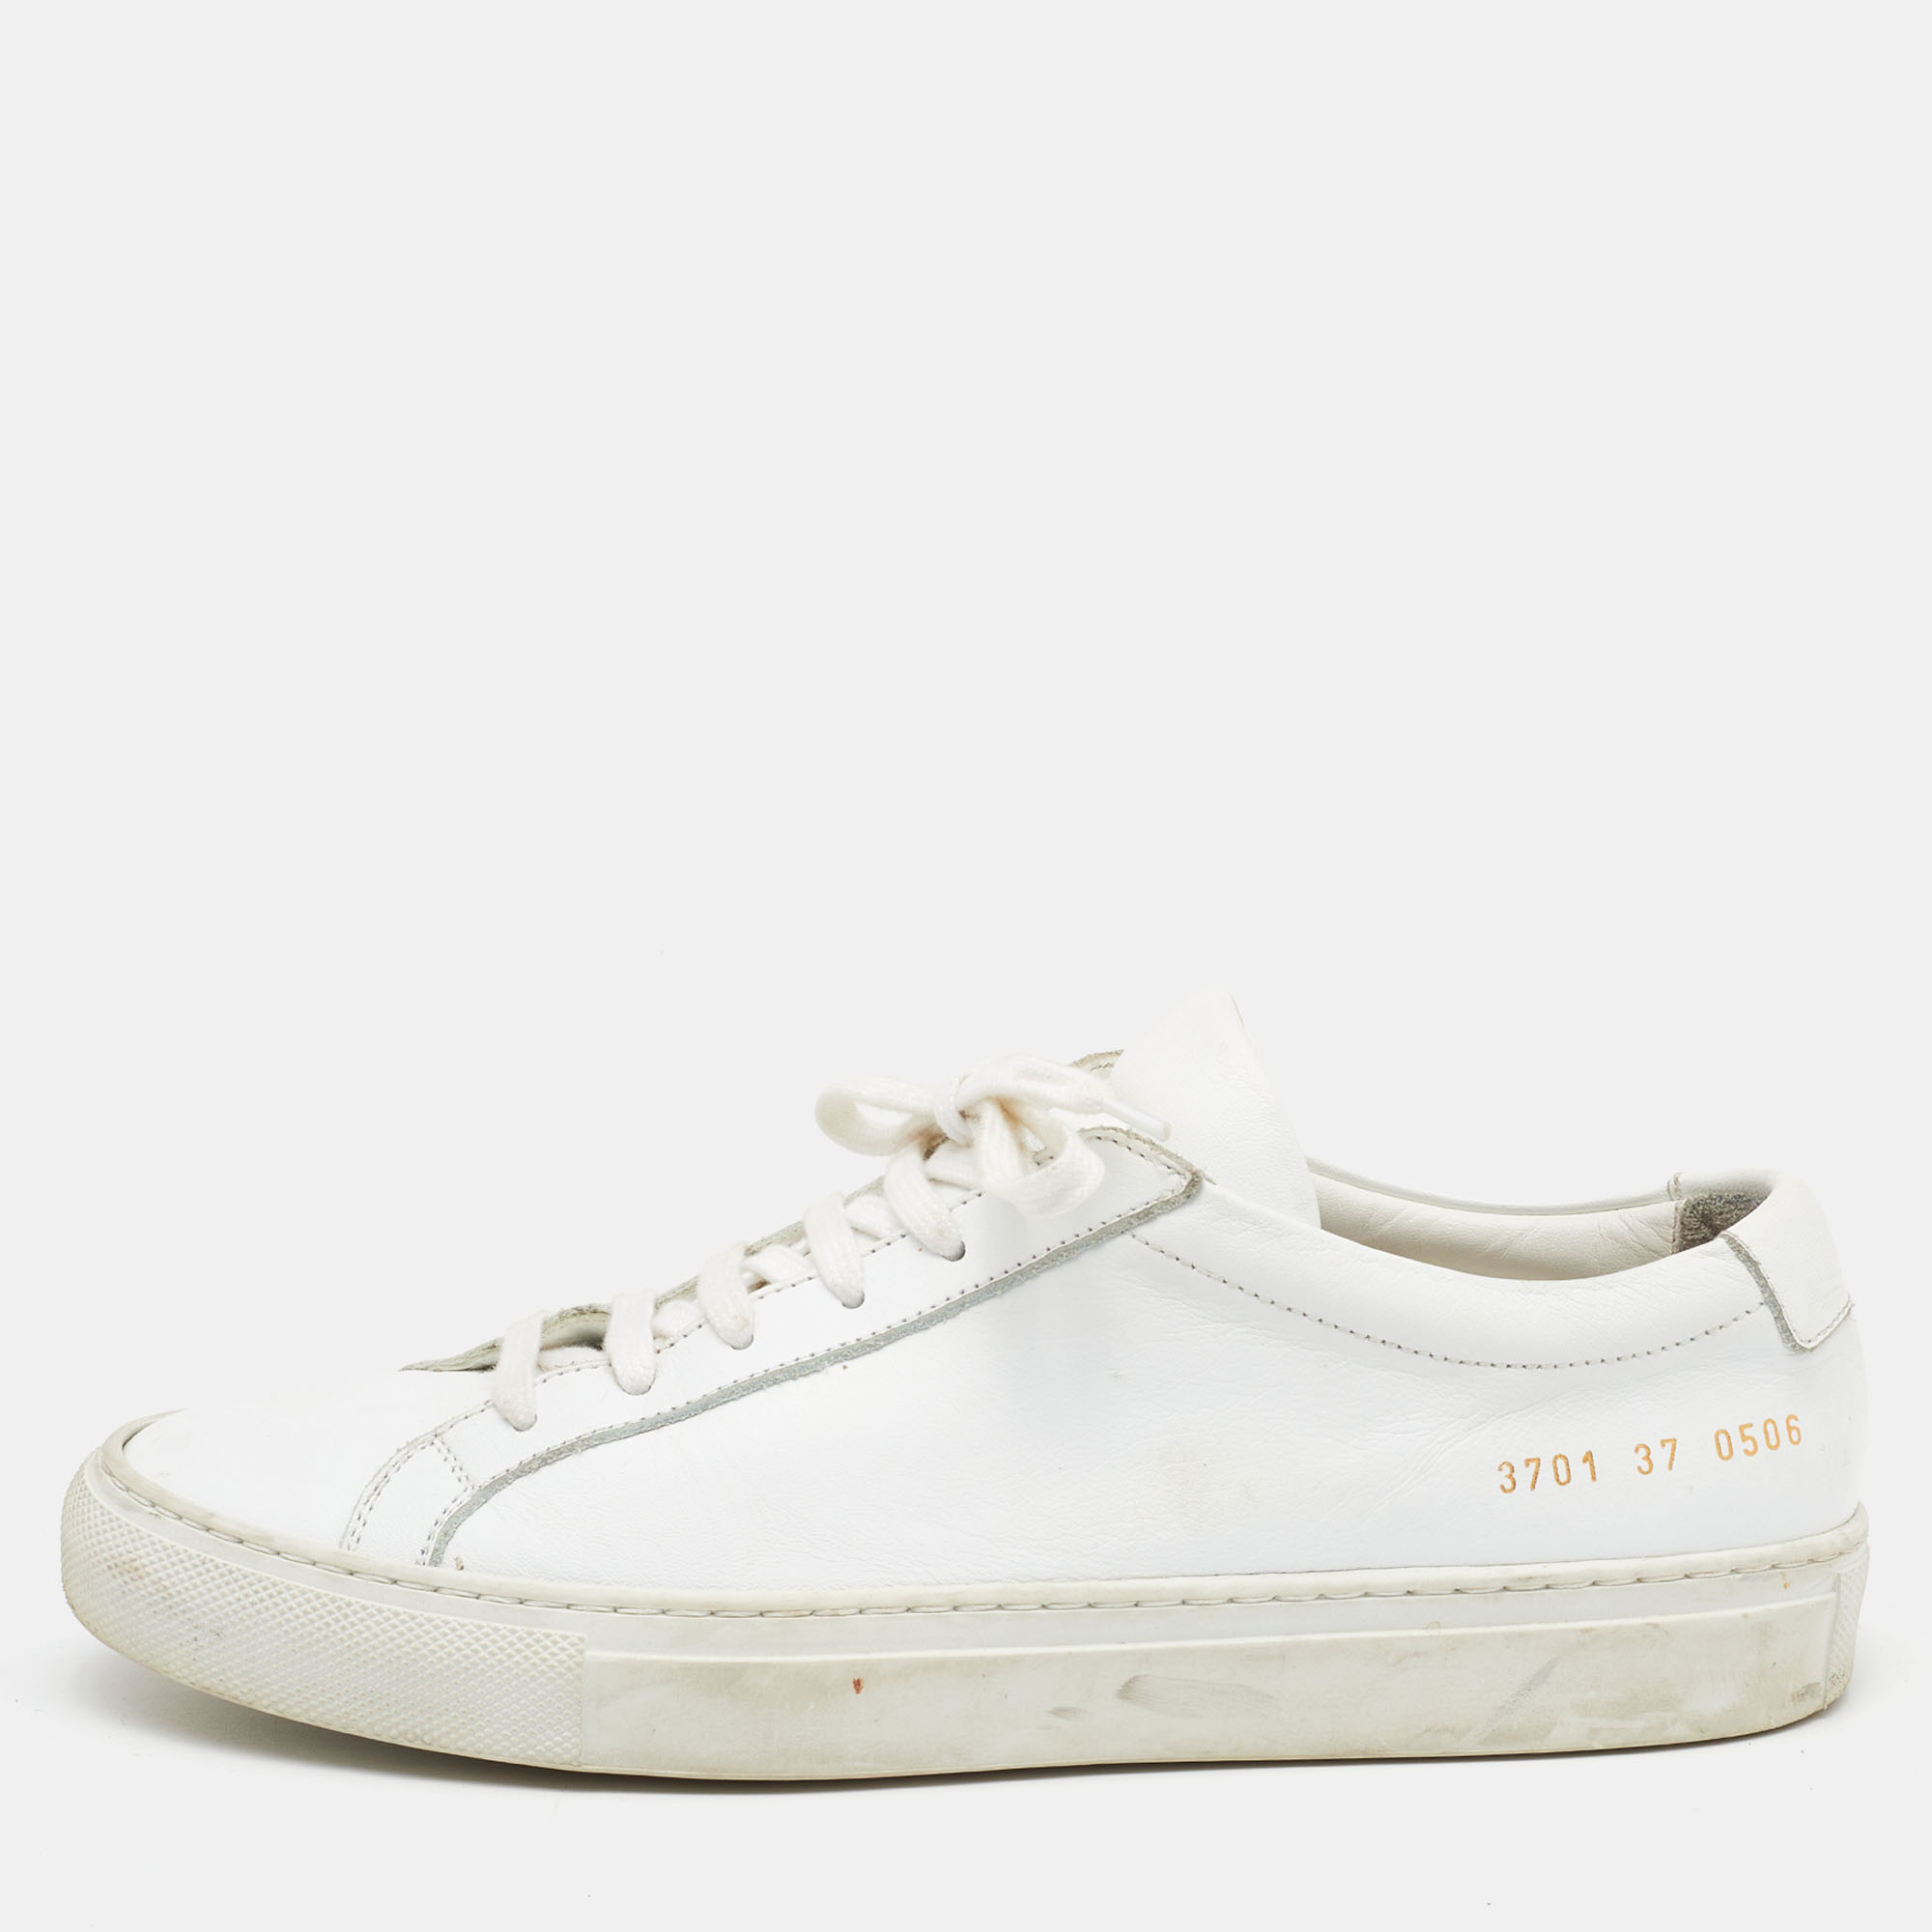 Common Projects White Leather Achilles Low Top Sneakers Size 37